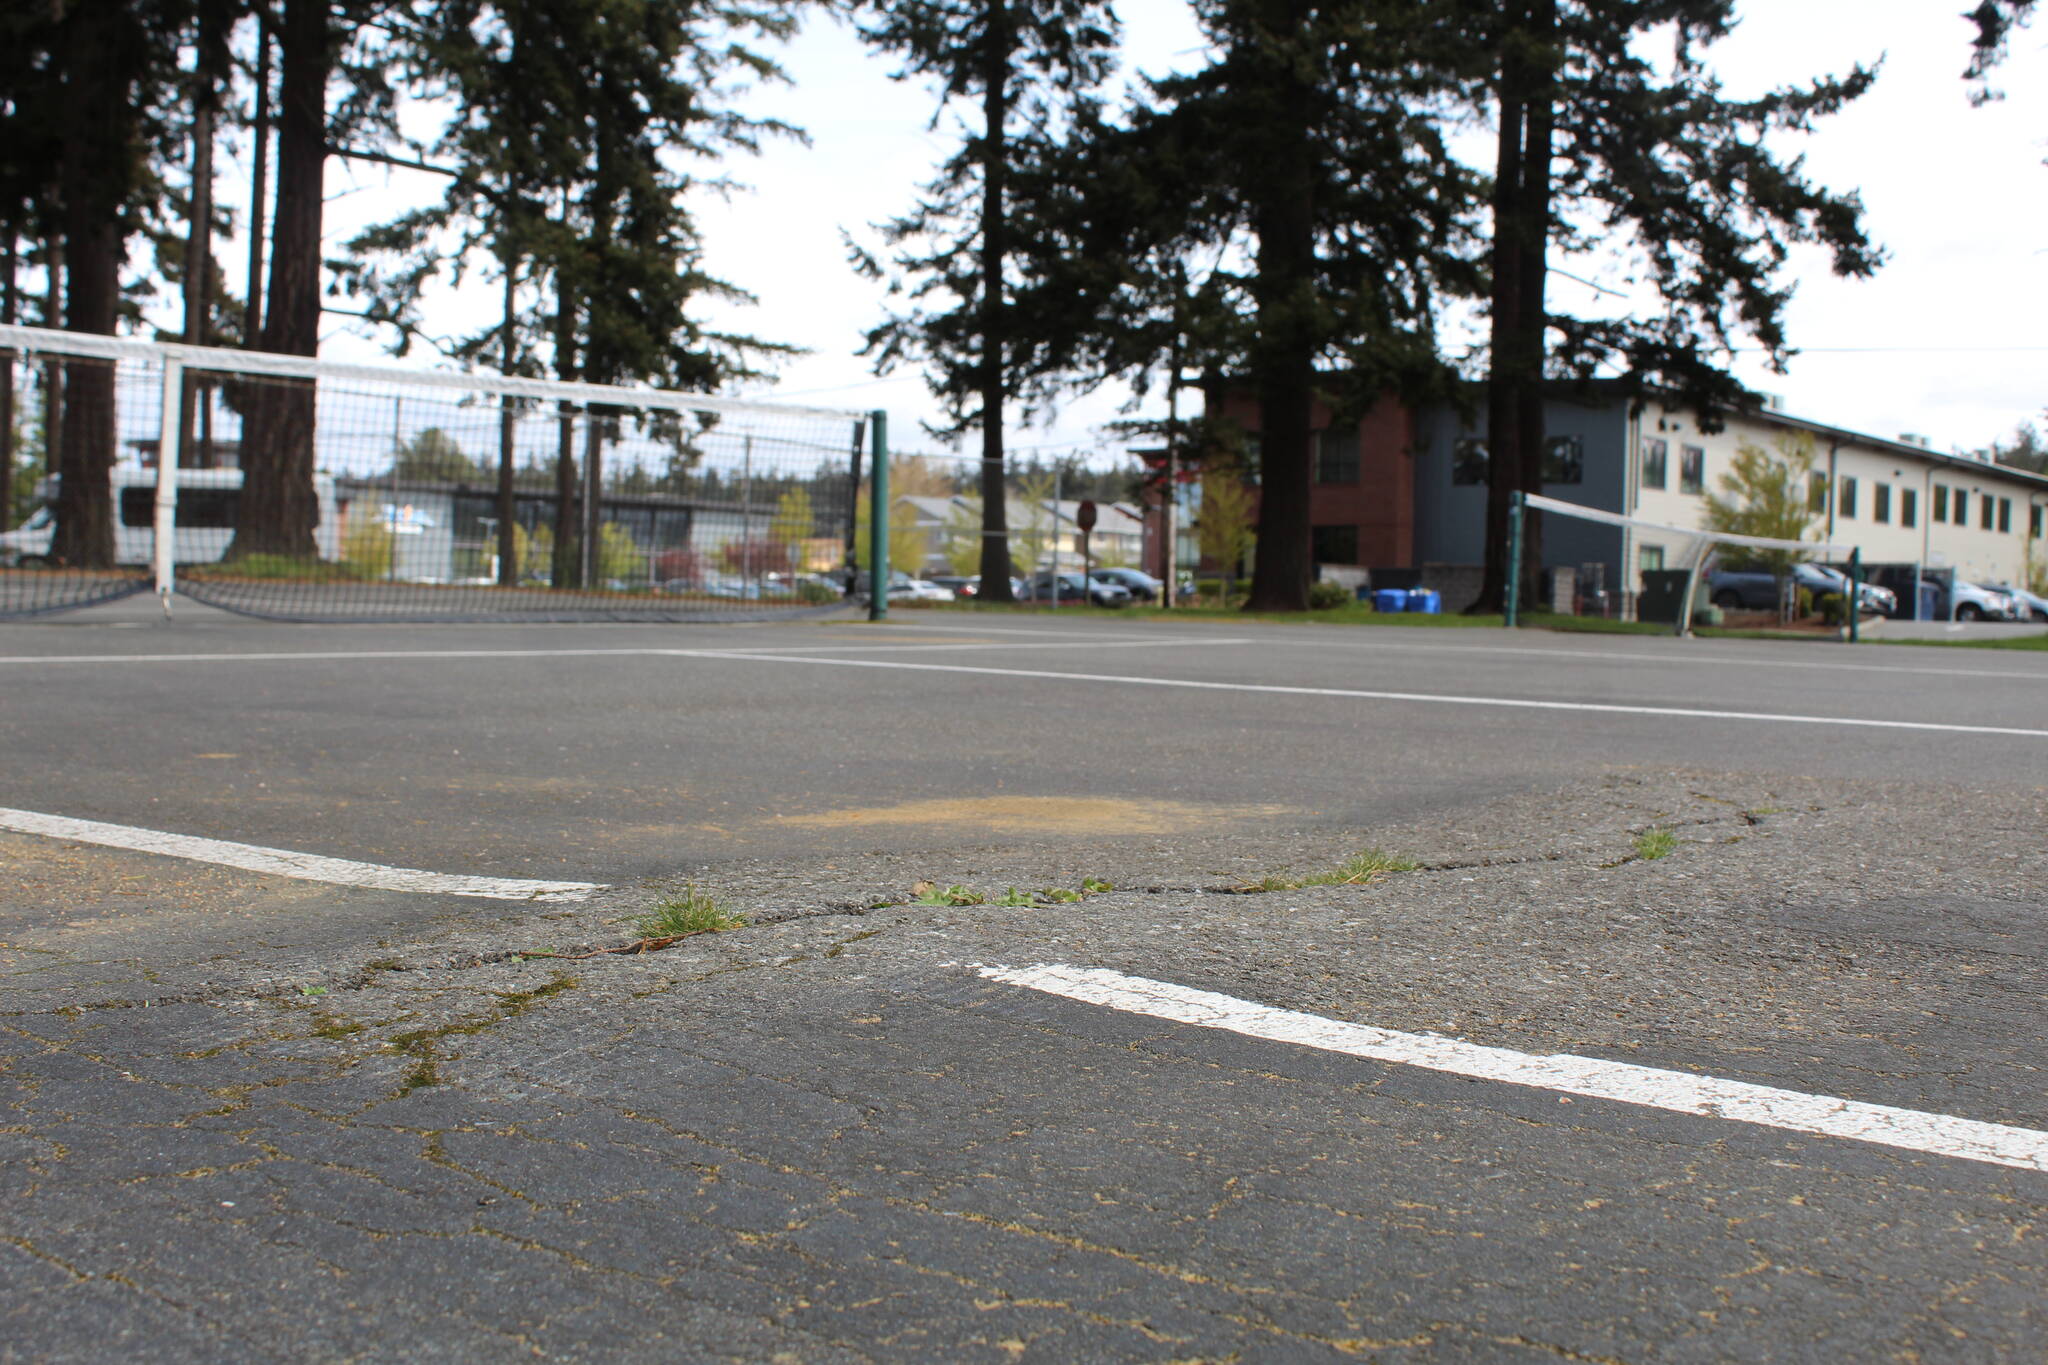 Photo by Karina Andrew/Whidbey News-Times
Root intrusions have caused some areas of the pickleball courts at Rotary Park to become uneven. These will be repaired when two new courts are added to the park.